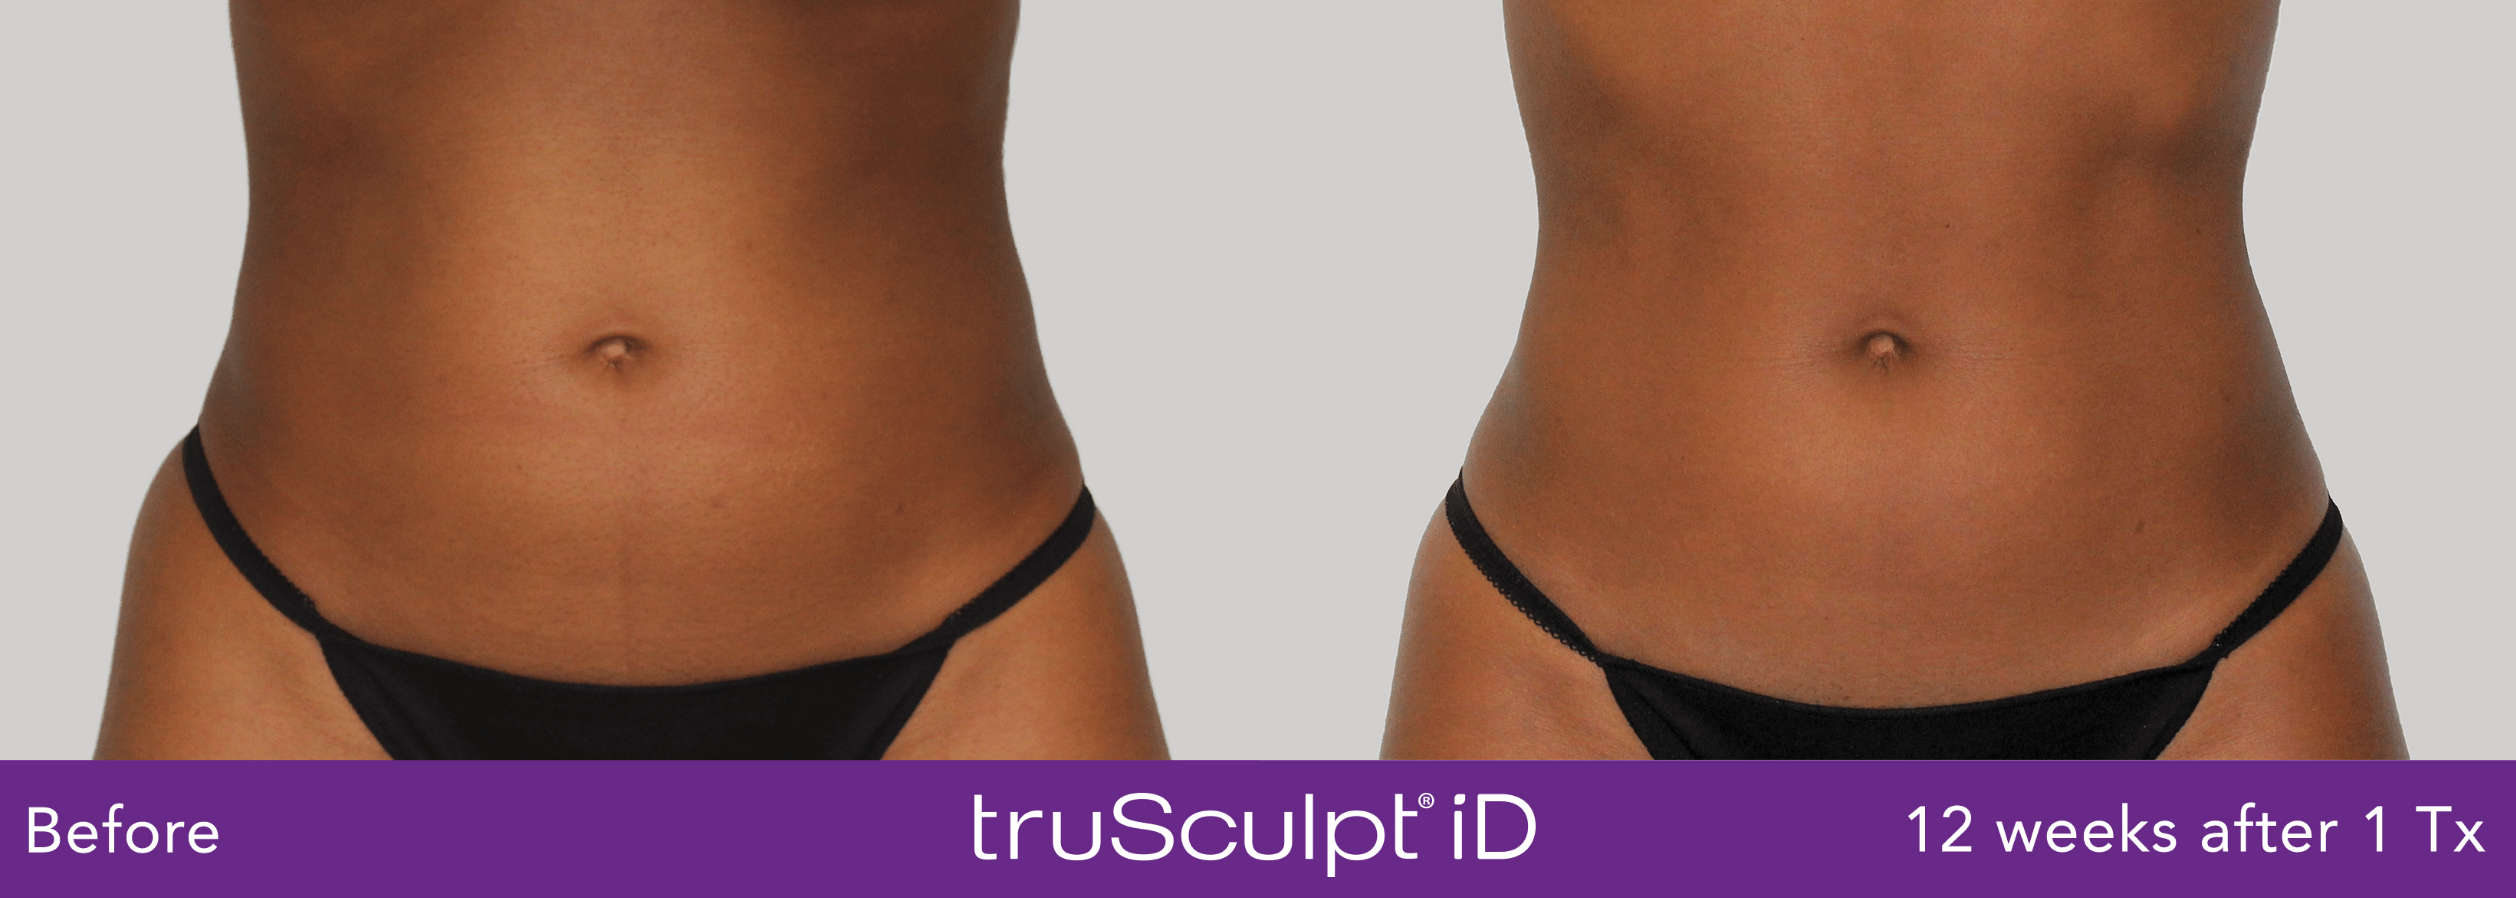 TruSculpt iD Before and After photo by Awazul Wellness & Weight Loss in Kihei, HI